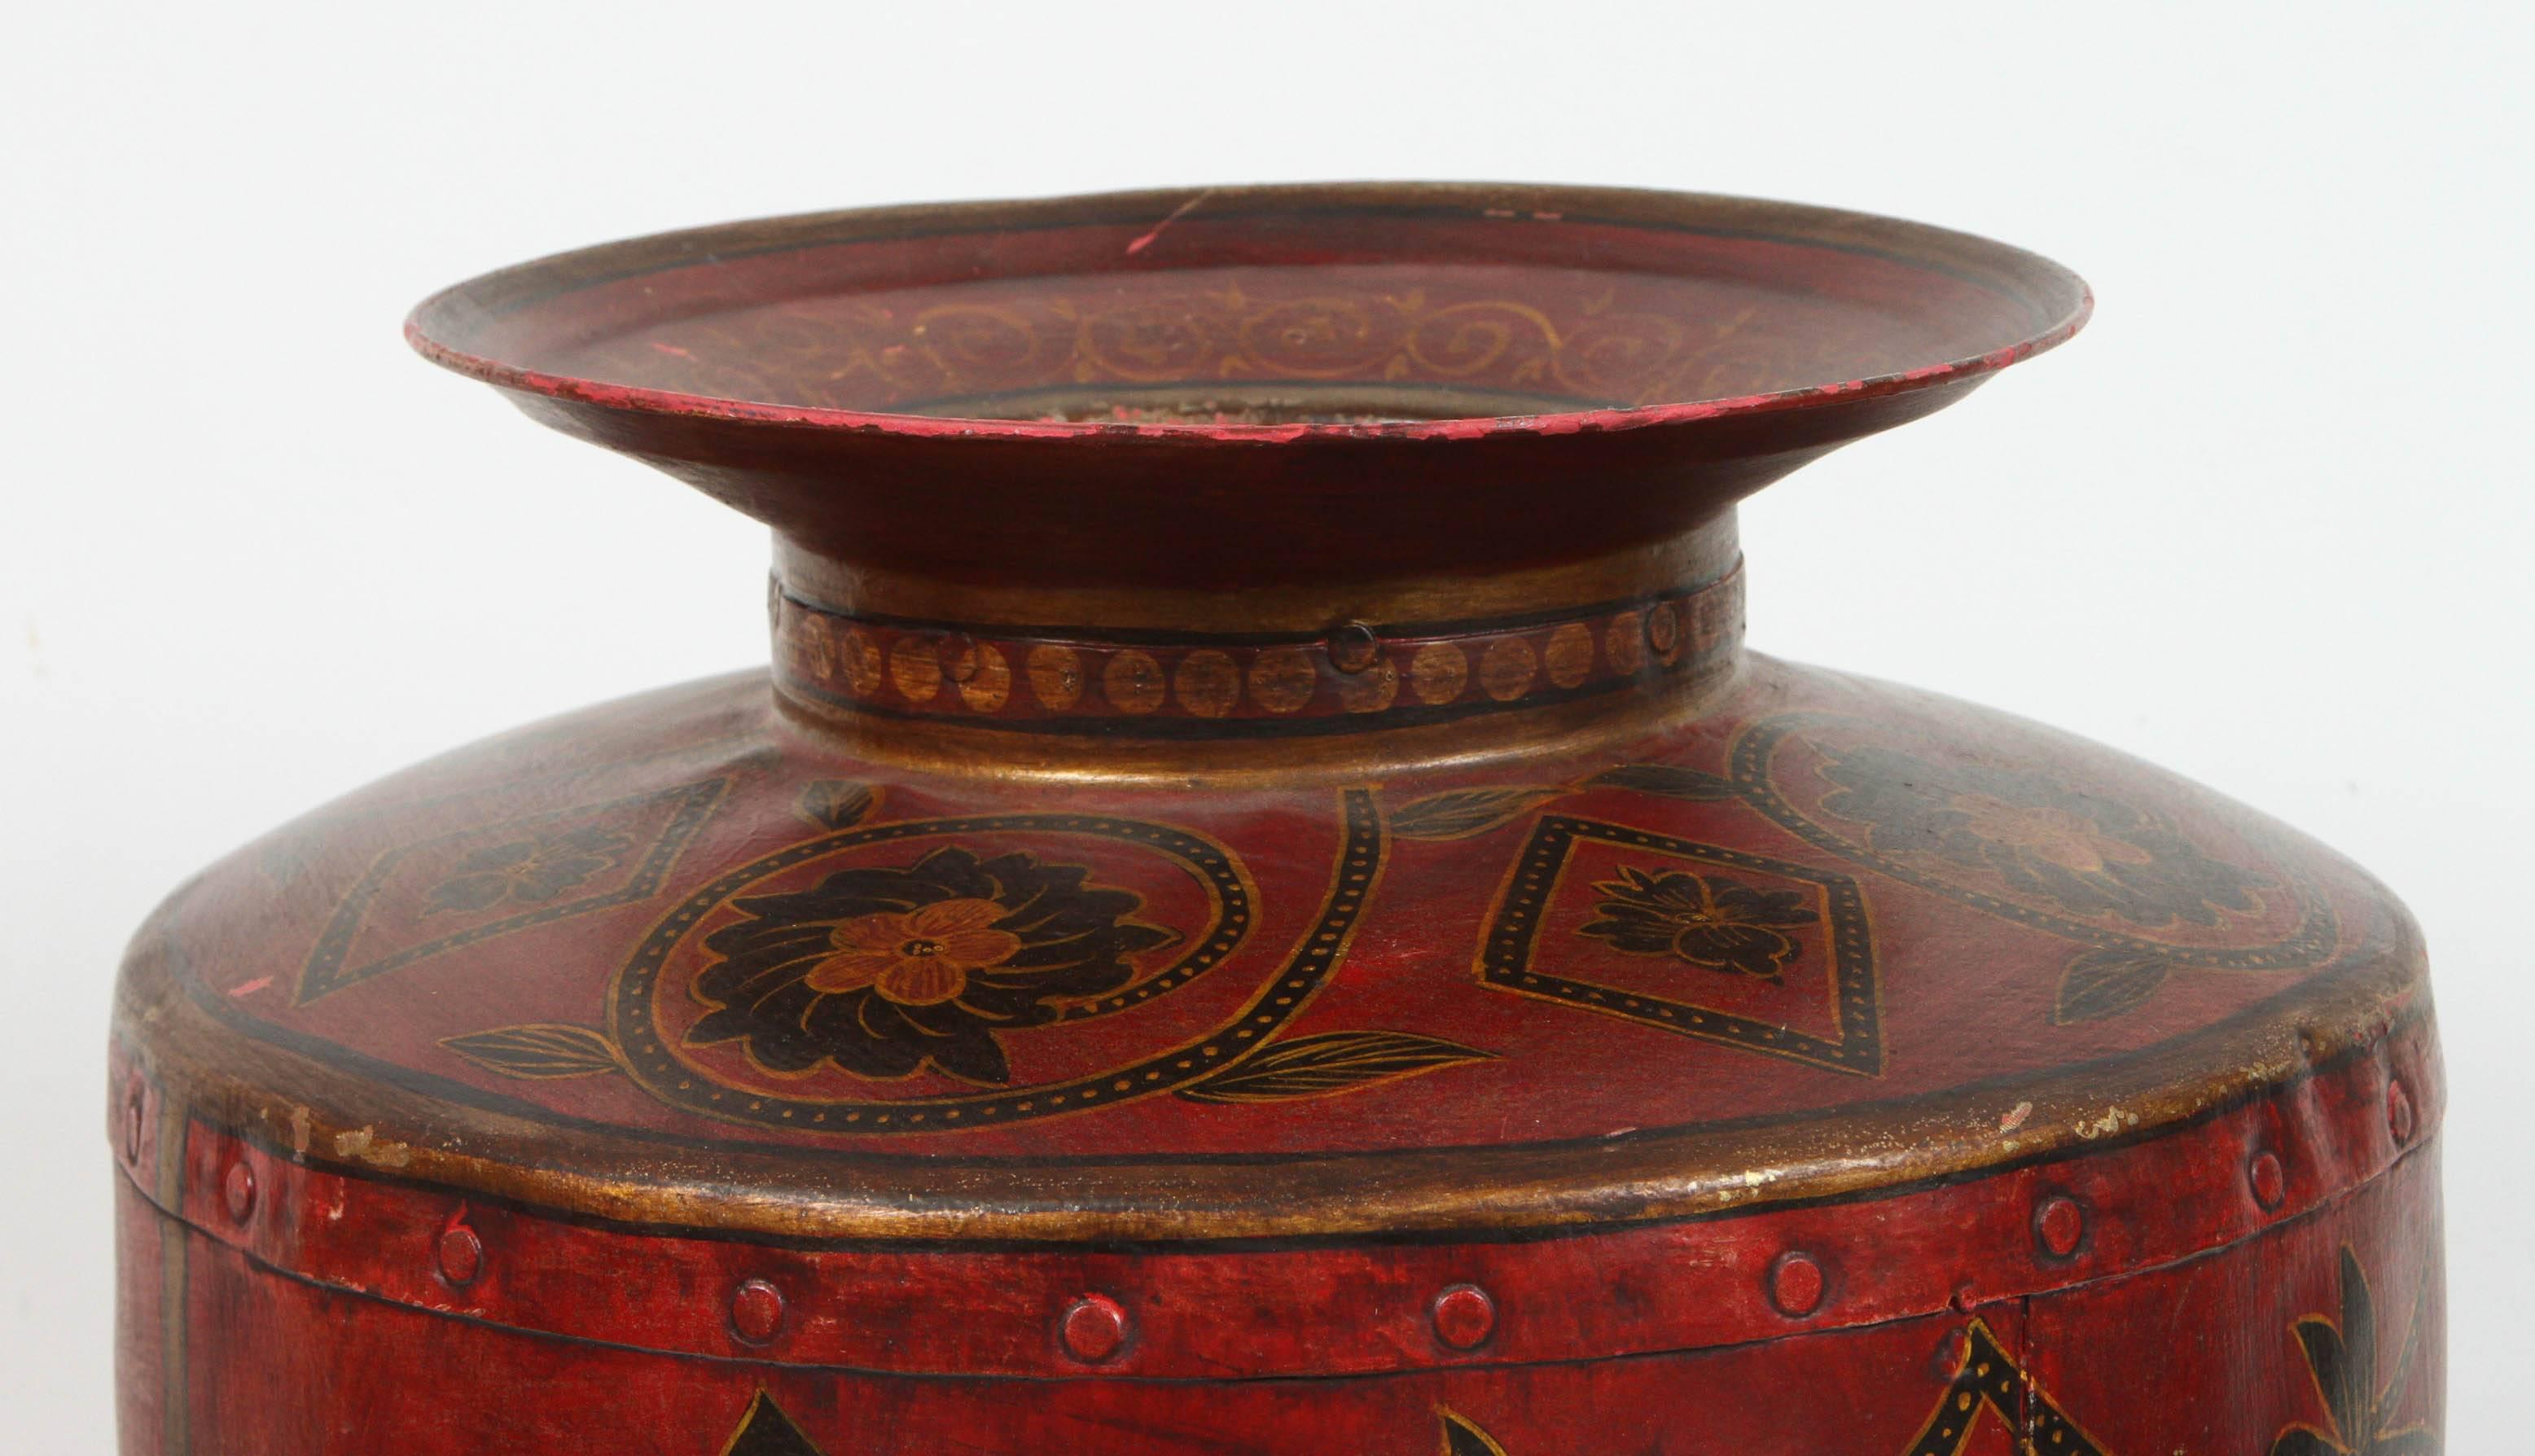 Hand-painted with flowering foliates on red background.
Indo-Raj large metal vessel, originally used to collect waters of the three sacred rivers, the Ganges and Yamuna Sarasvati, this large vessel is much more than just a piece of furniture. It